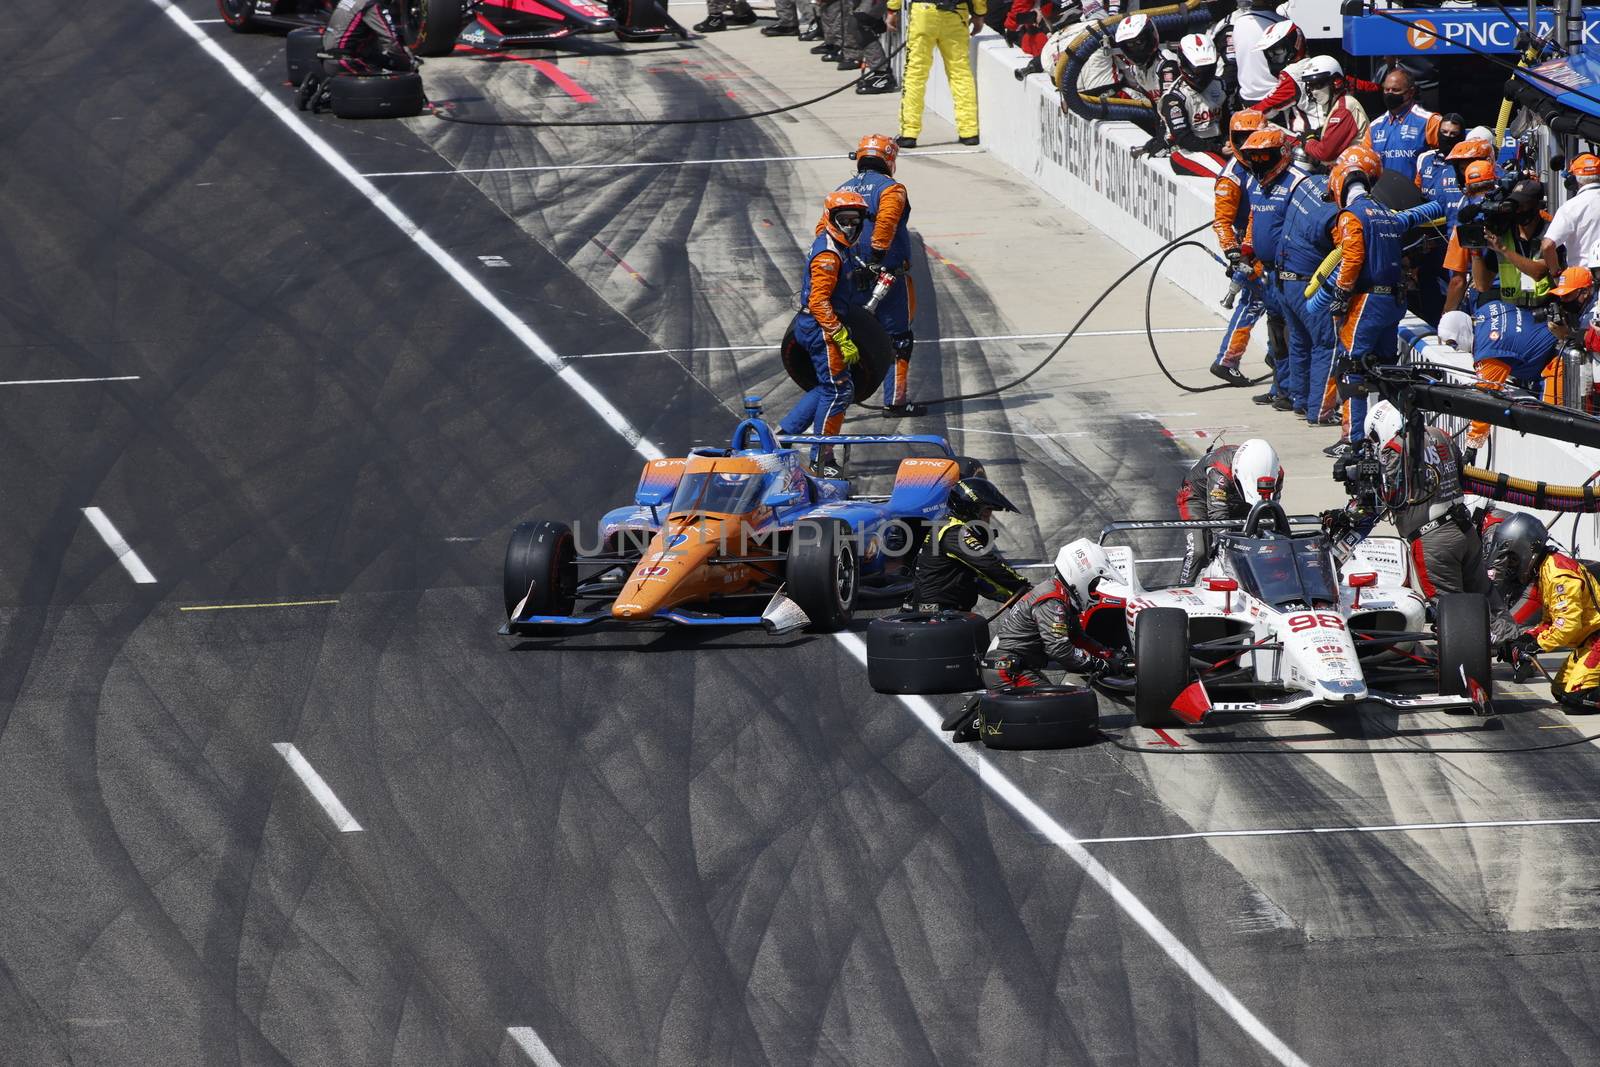 The NTT IndyCar Series teams take to the track to race for the Indianapolis 500 at Indianapolis Motor Speedway in Indianapolis Indiana.